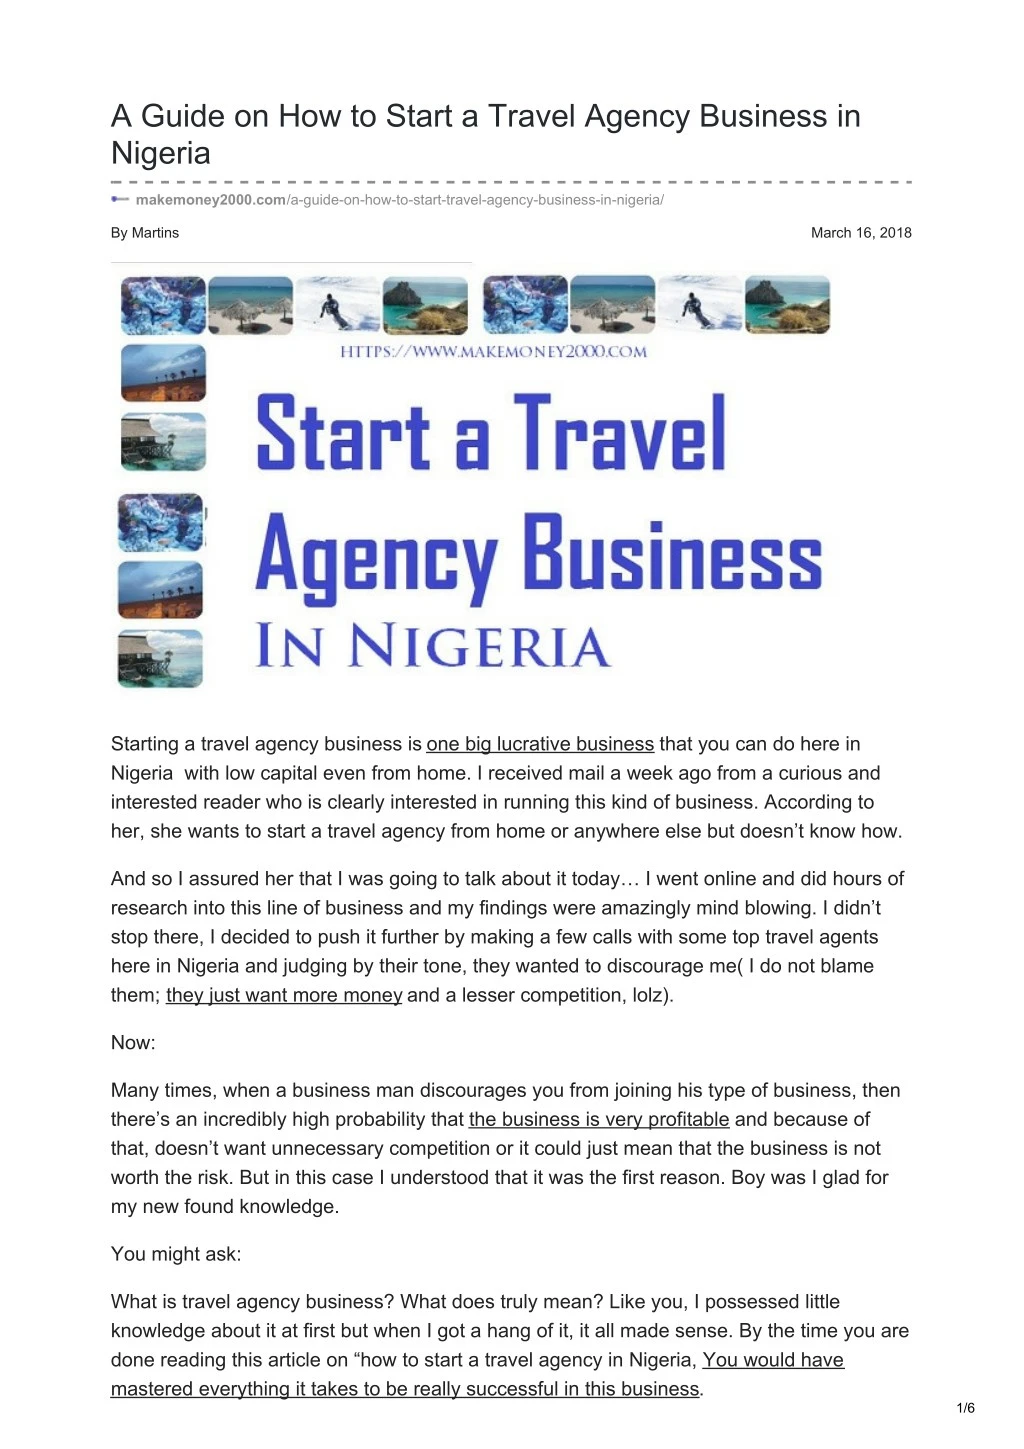 a guide on how to start a travel agency business